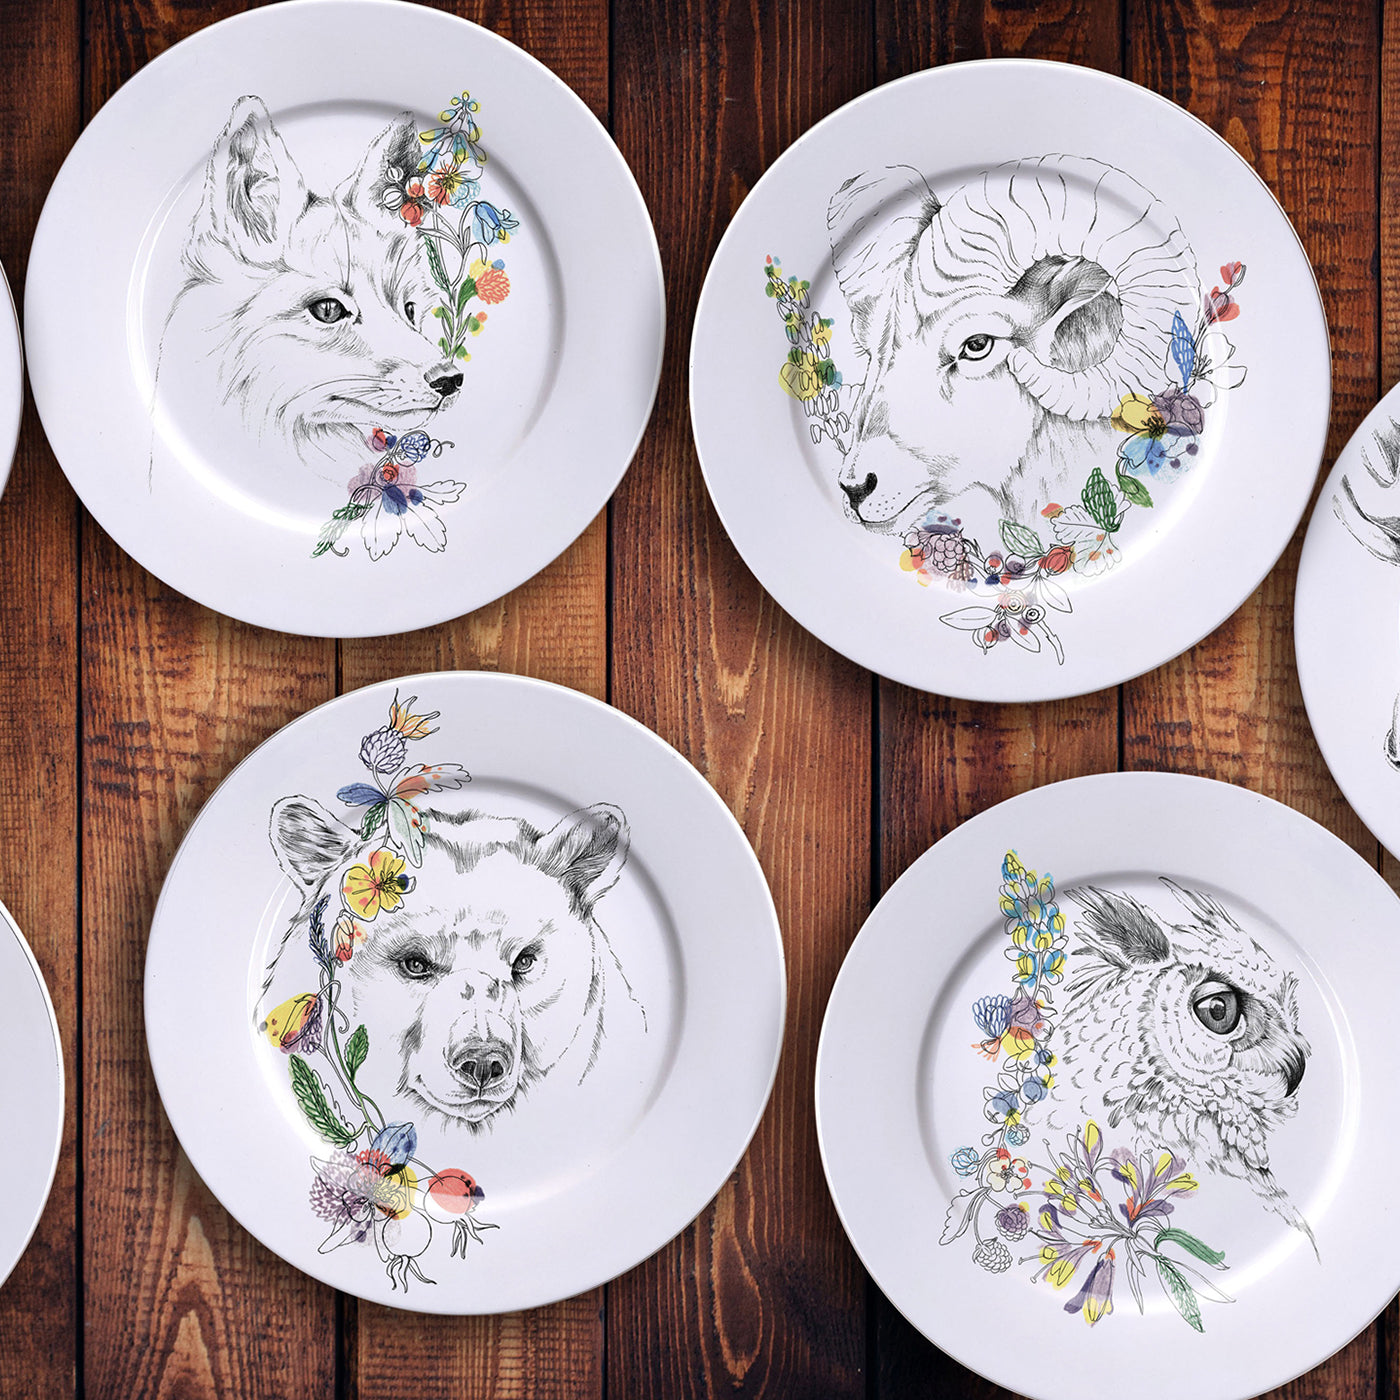 An Ode To The Woods Red Fox Dinner Plate - Alternative view 1